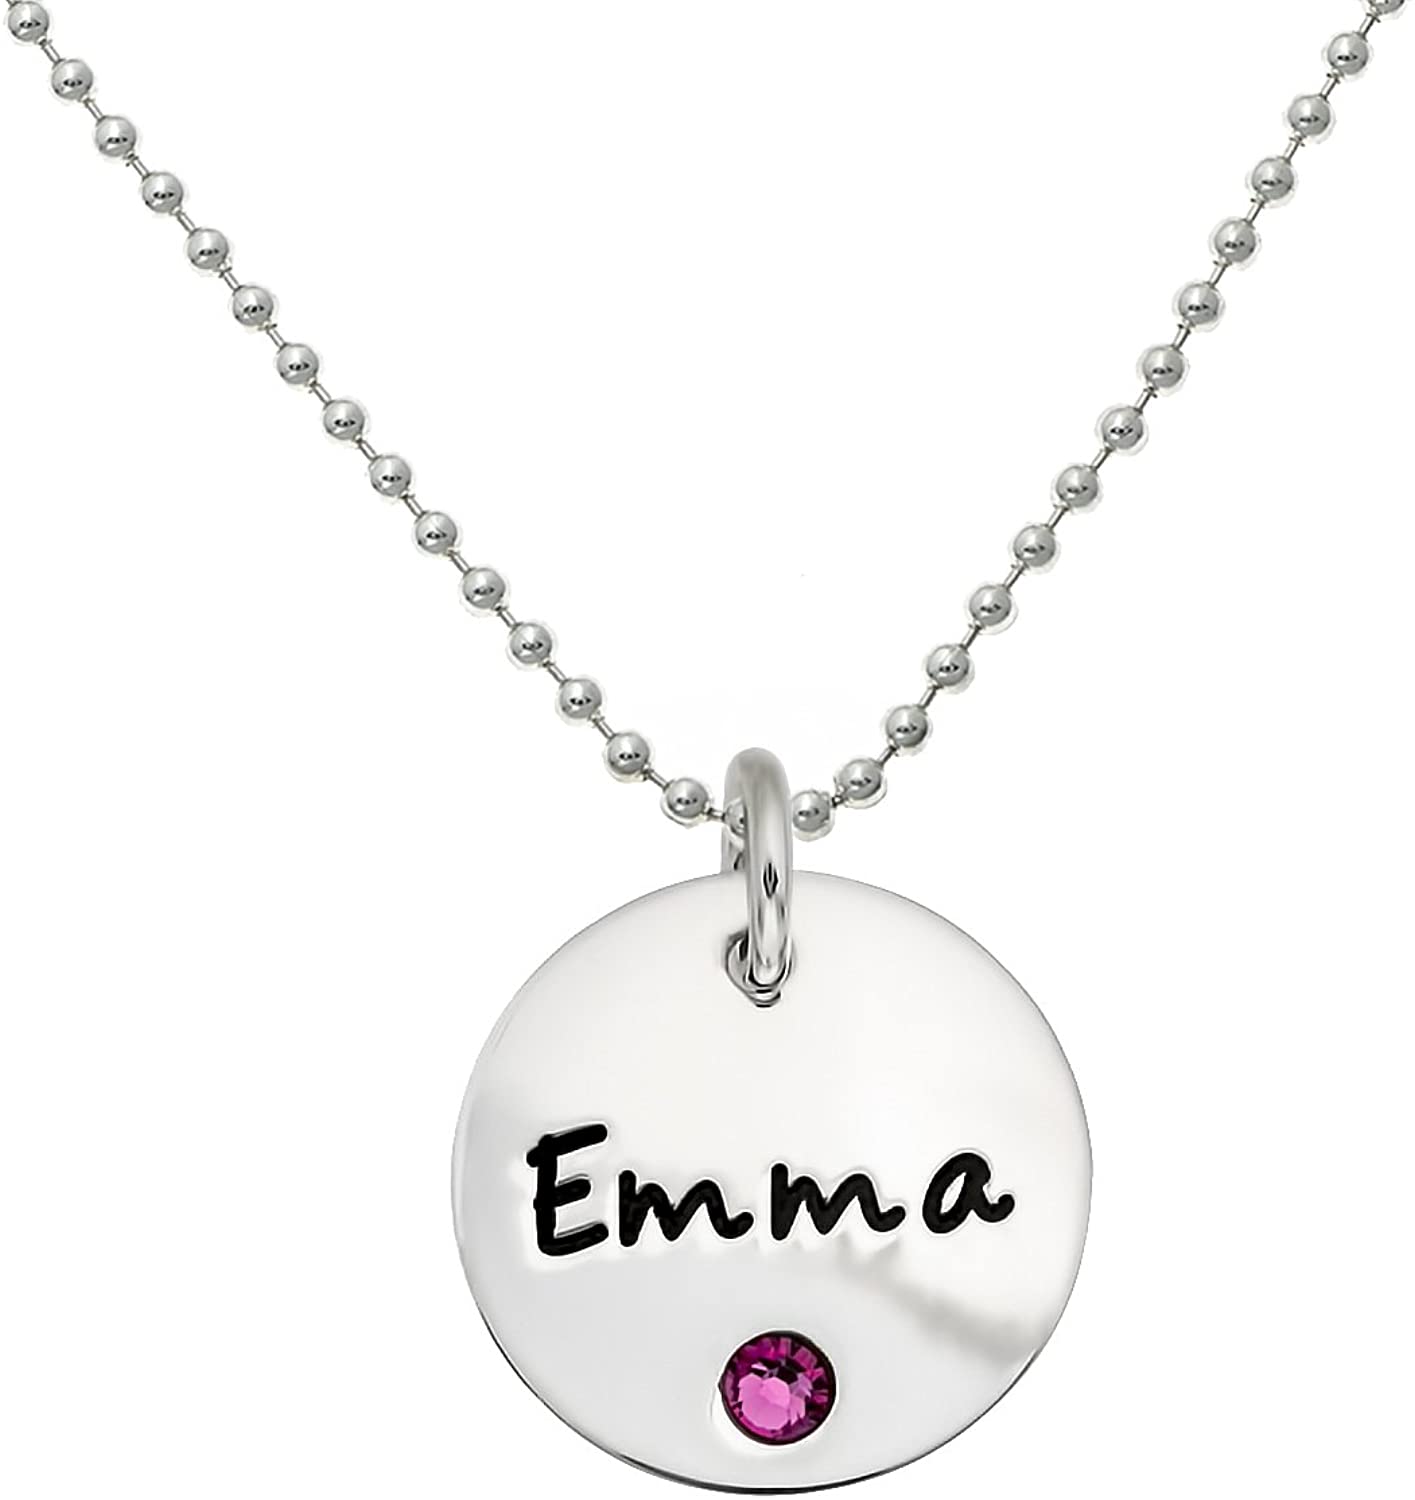 Personalized Sterling Silver Round Name Charm Necklace with Choice of Swarovski Birthstone Setting